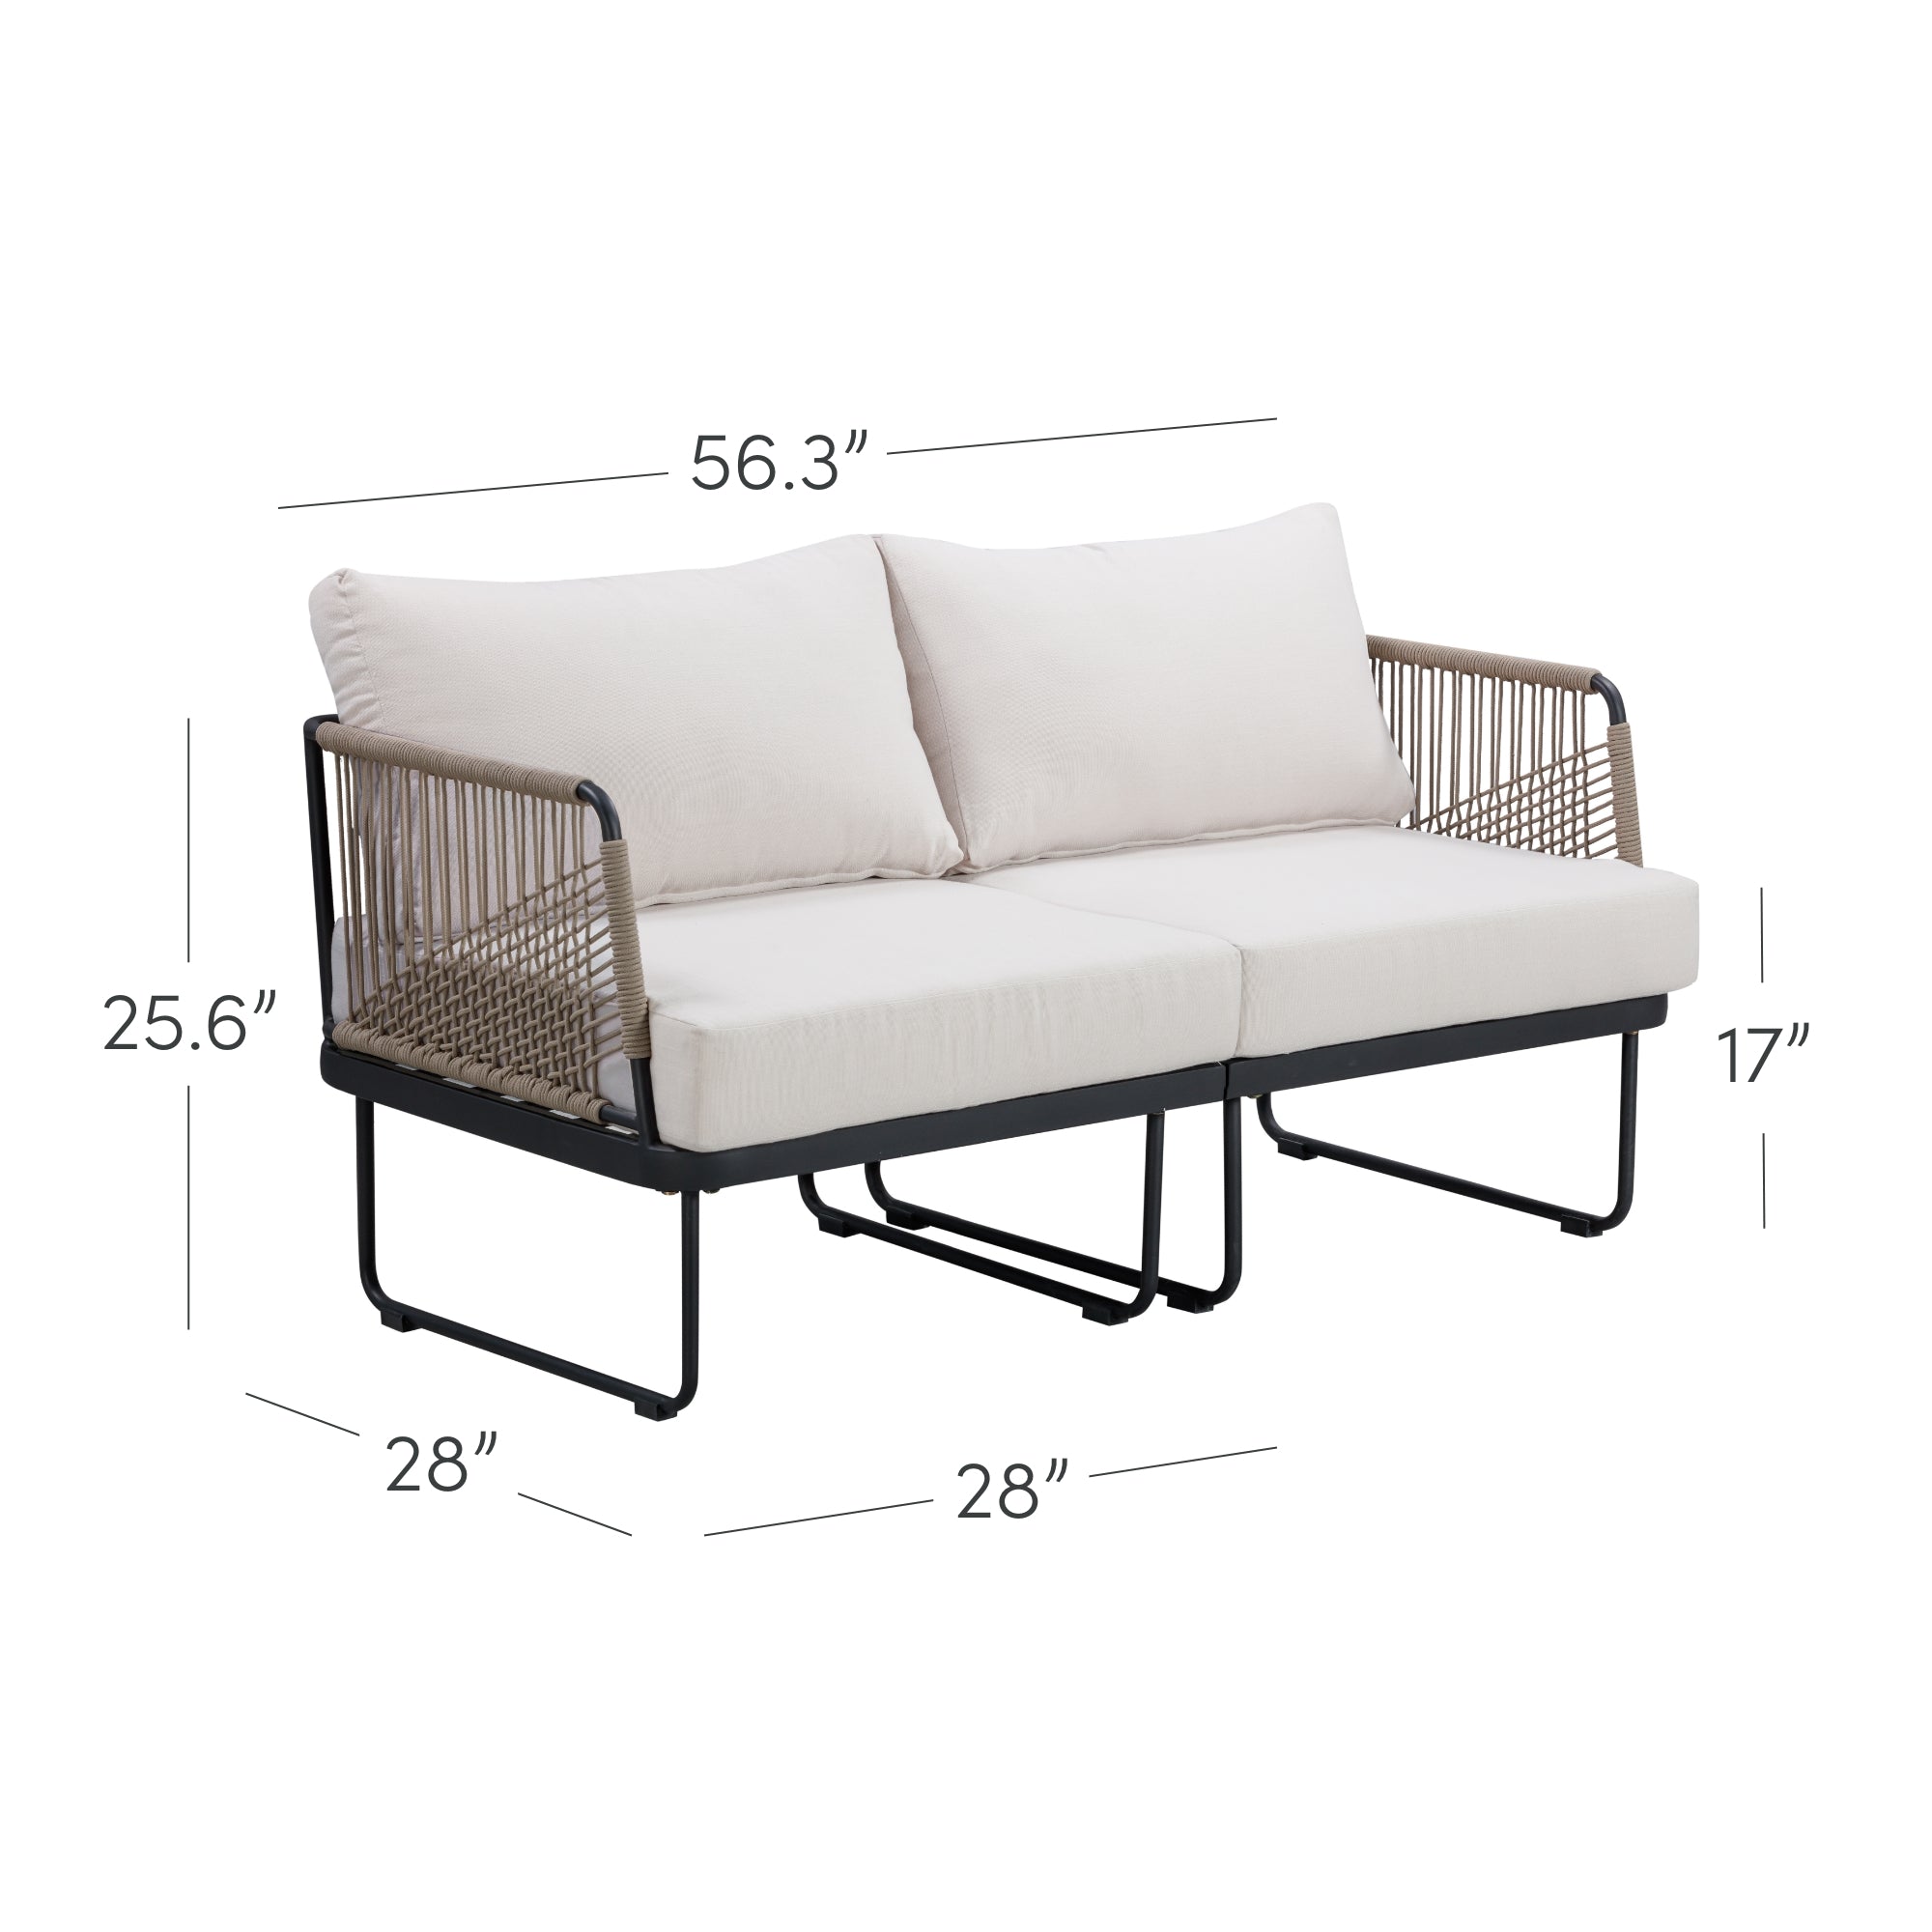 Set of 2 Outdoor Patio Cord Loveseats White